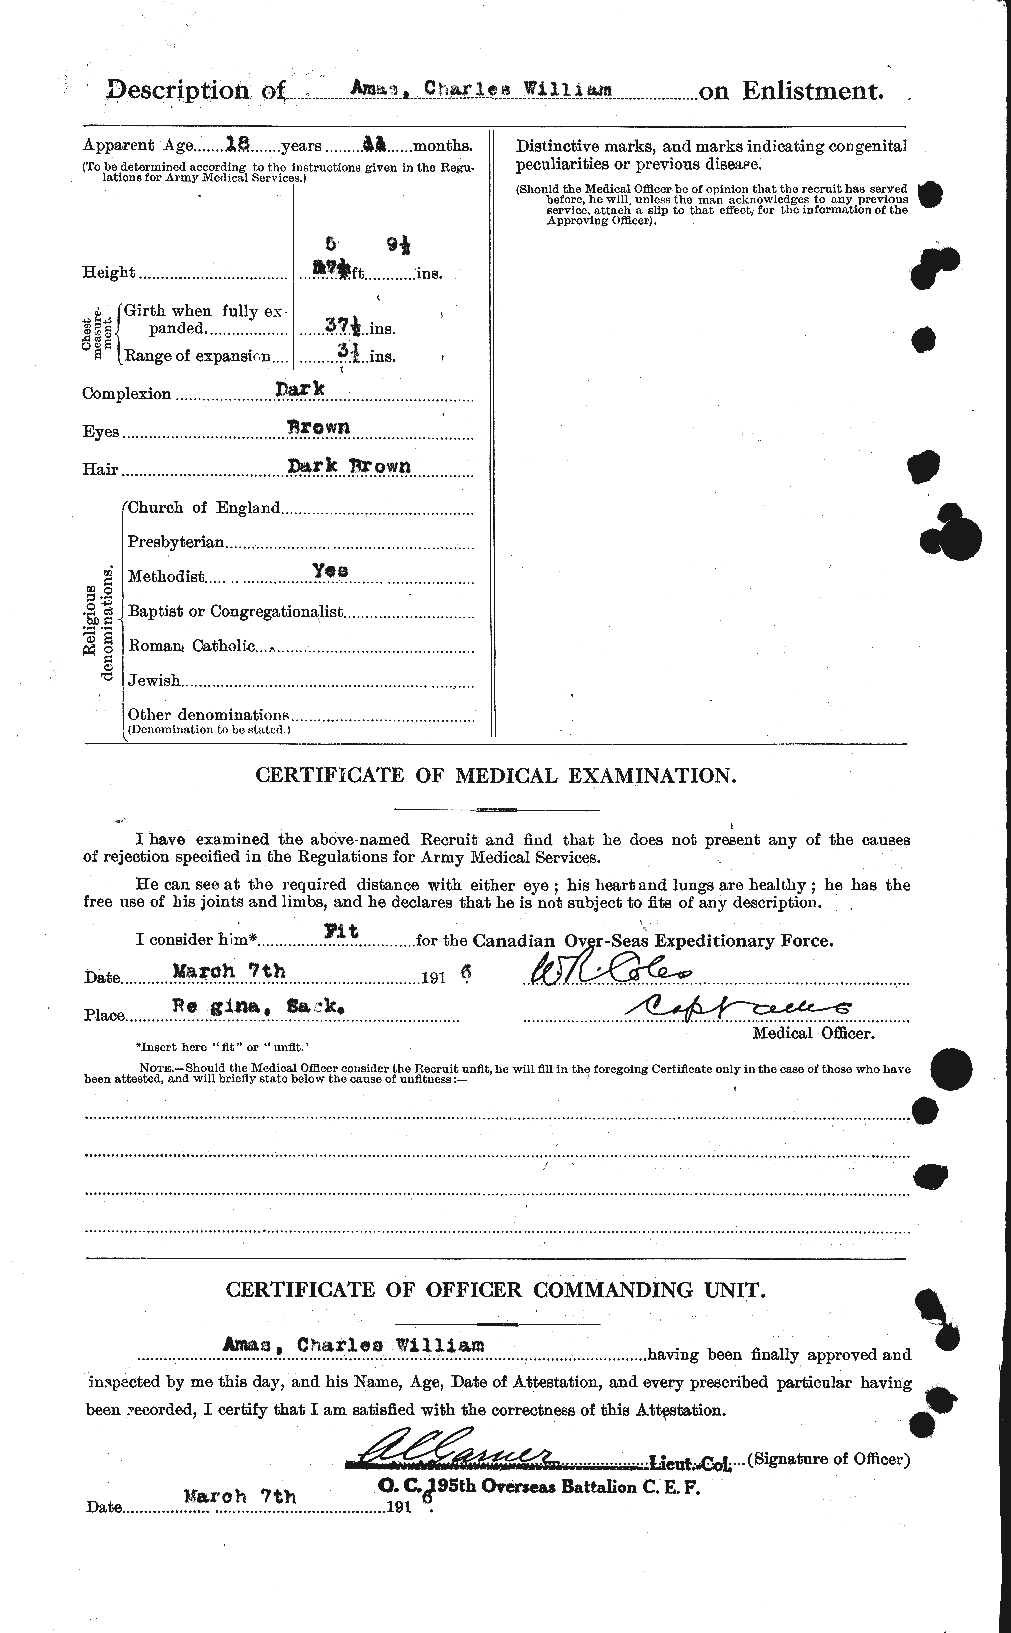 Personnel Records of the First World War - CEF 208999b